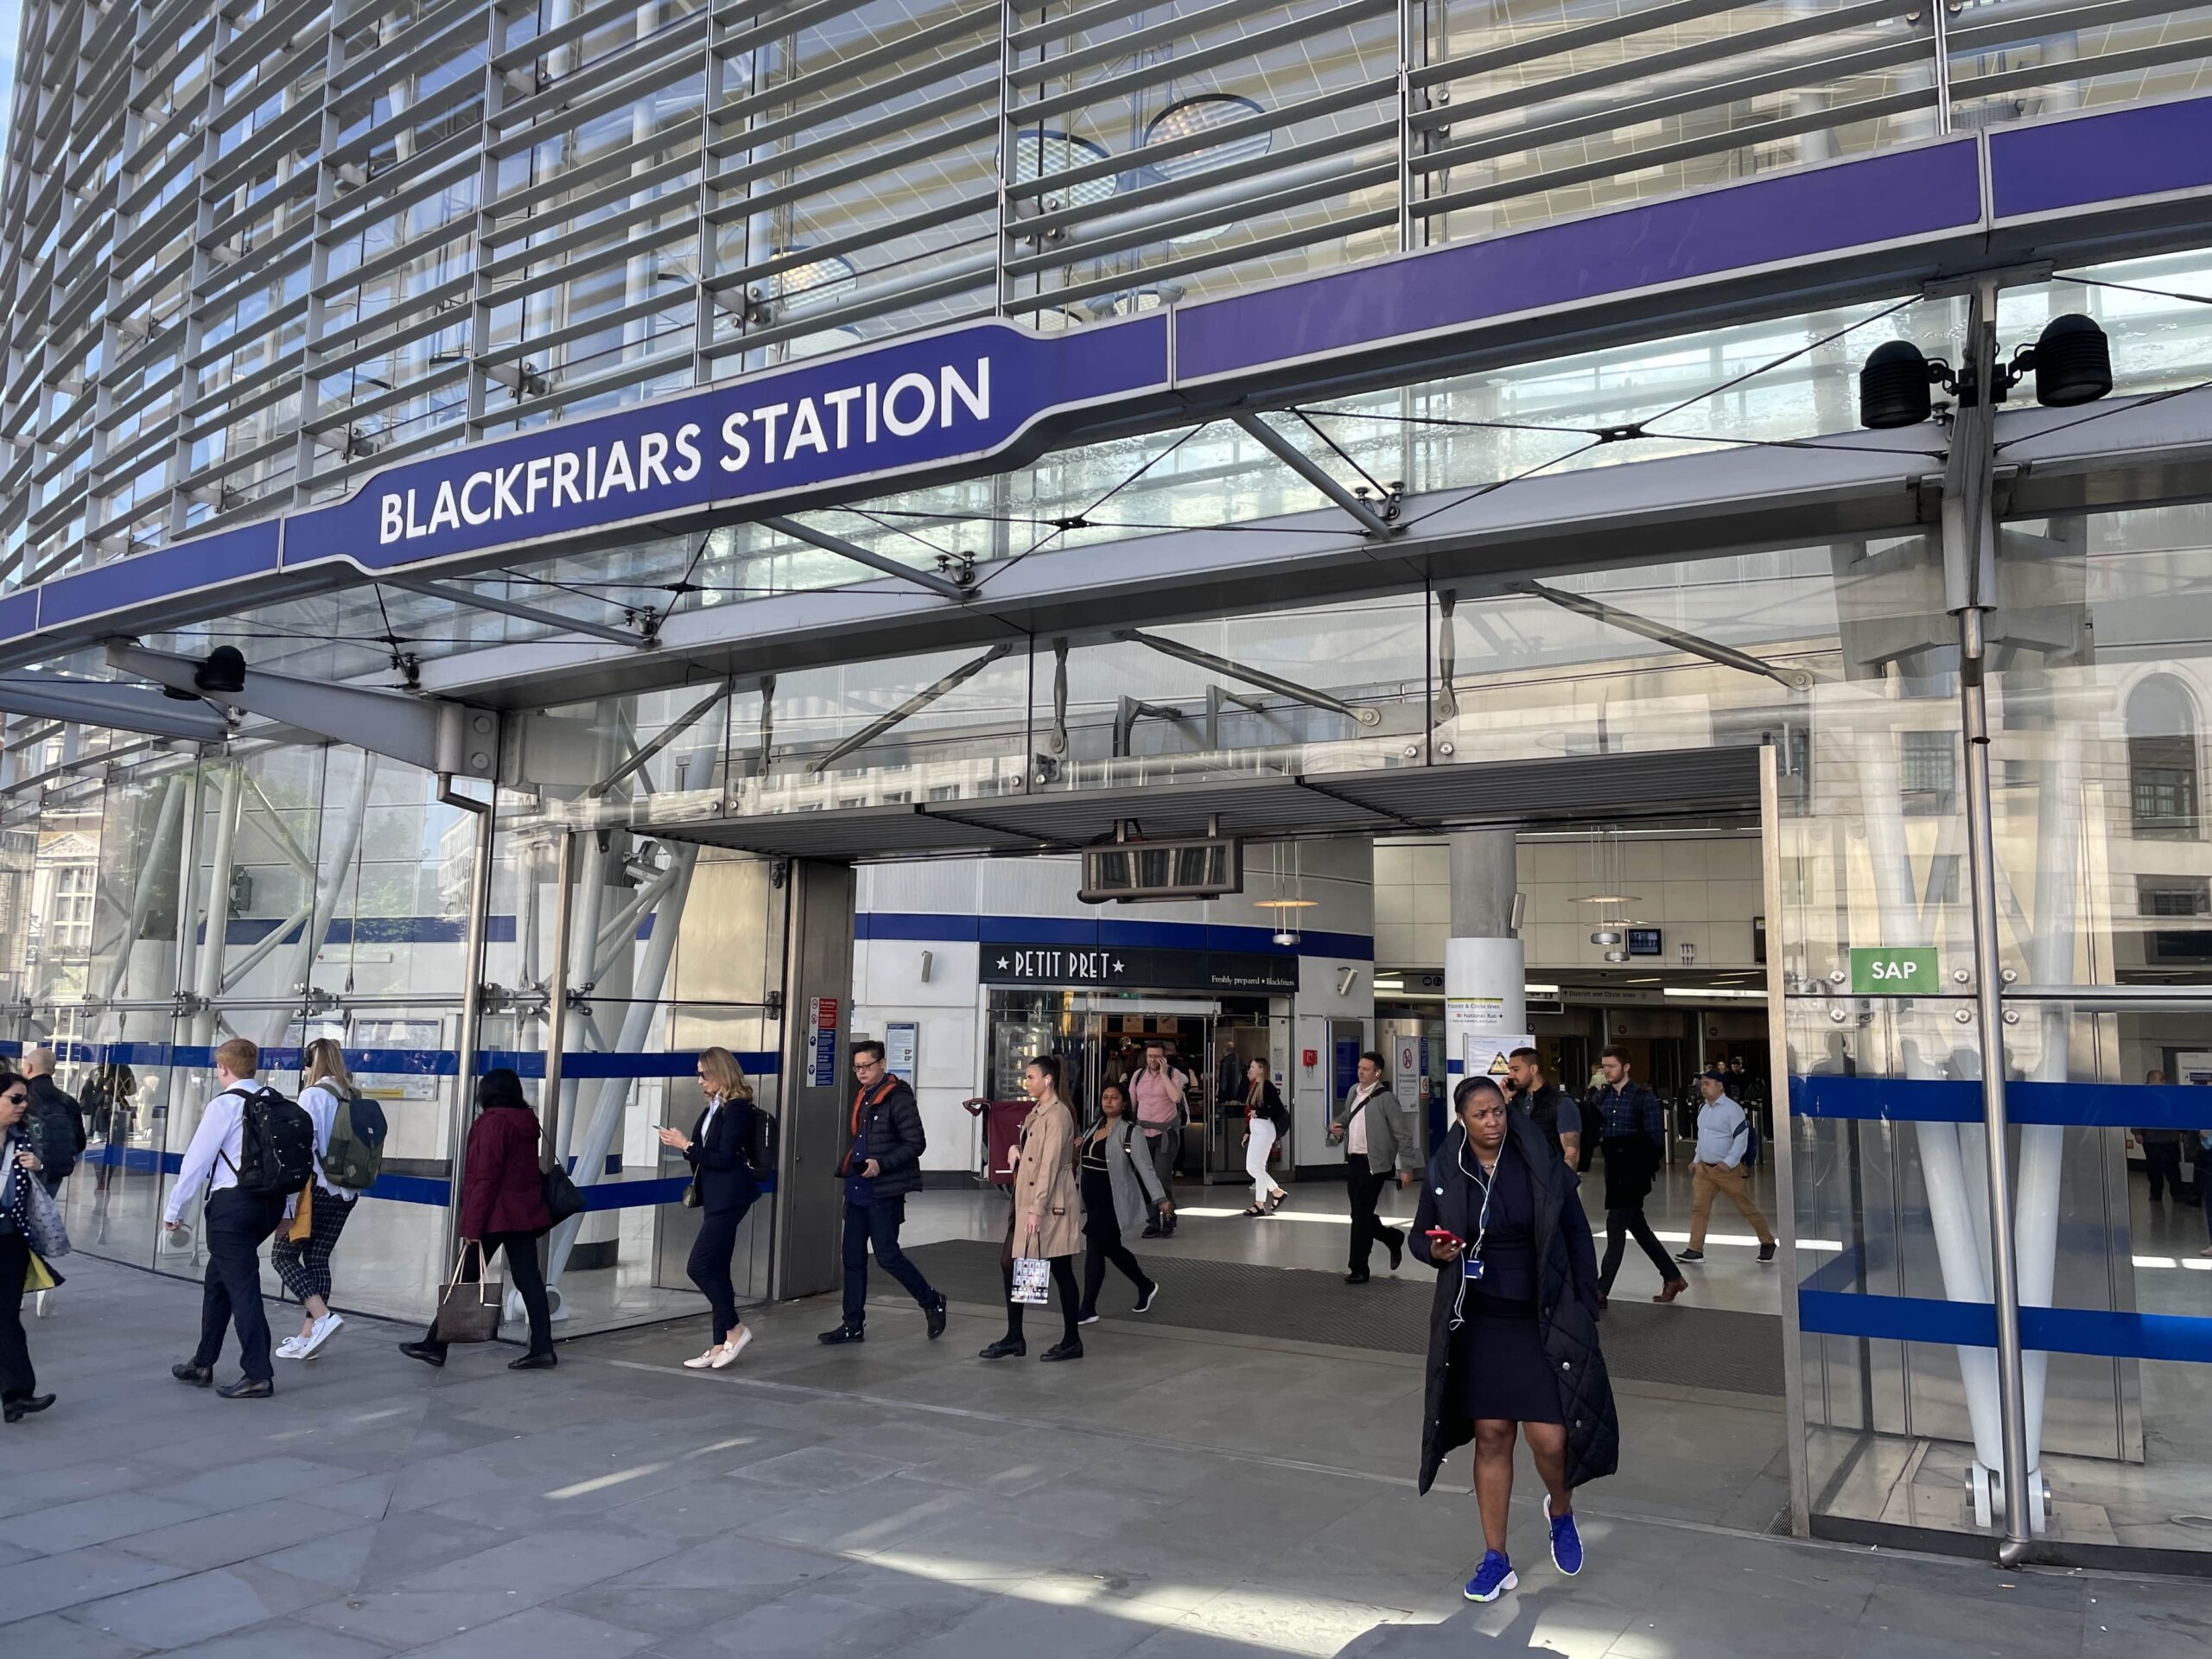 london blackfriars station train to brighton easy solo day trip from london uk best seaside villages things to see and do attractions